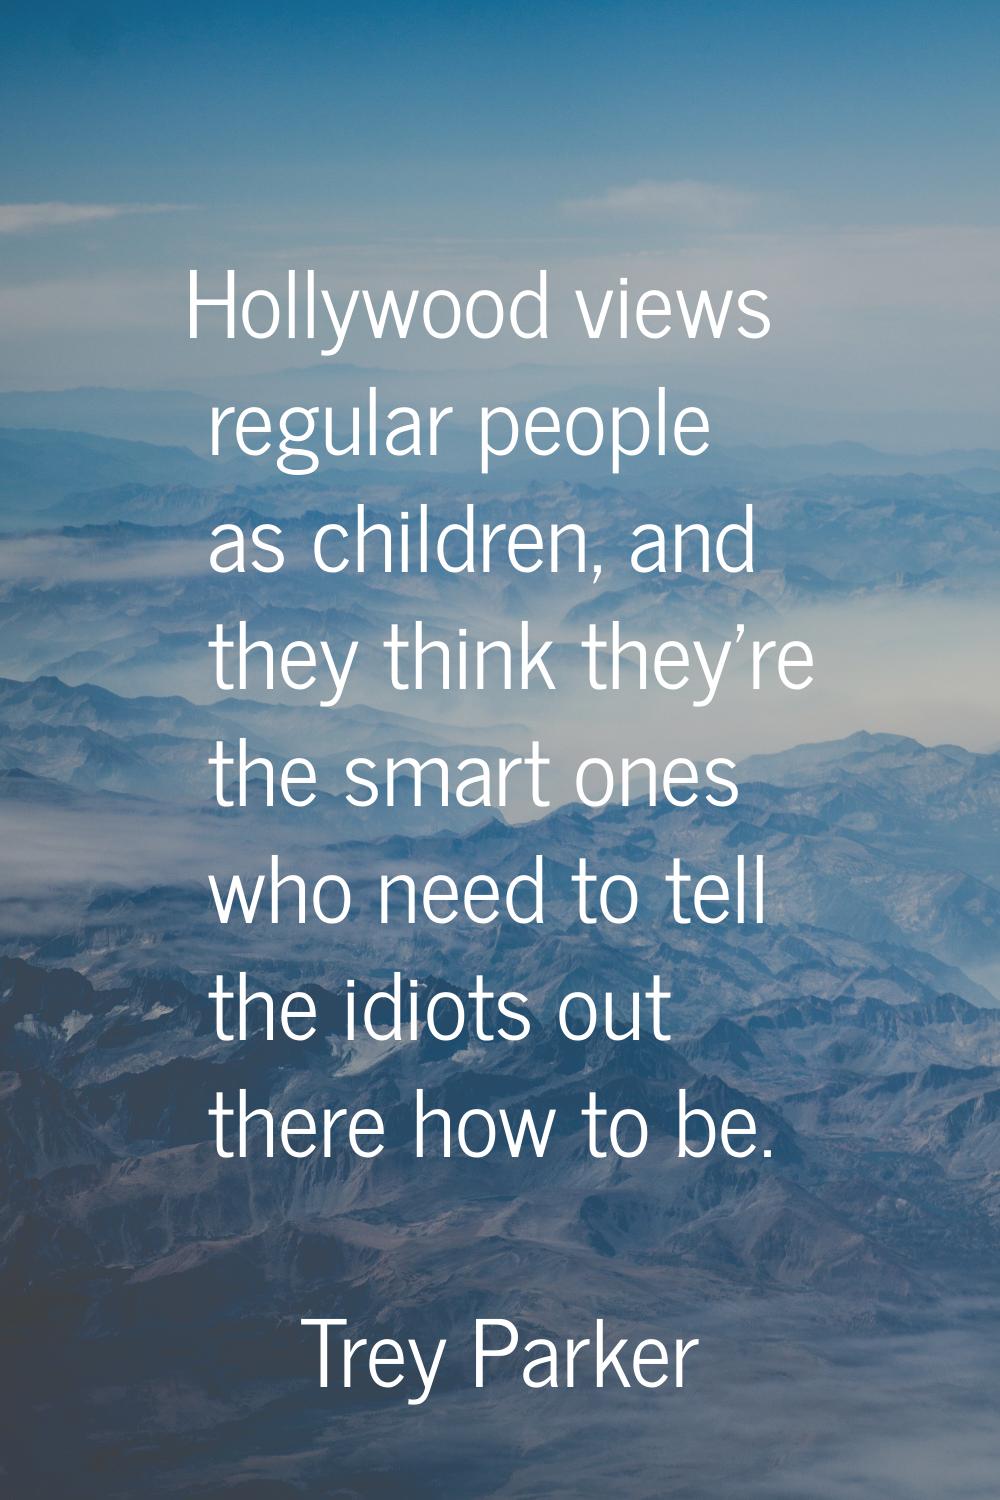 Hollywood views regular people as children, and they think they're the smart ones who need to tell 